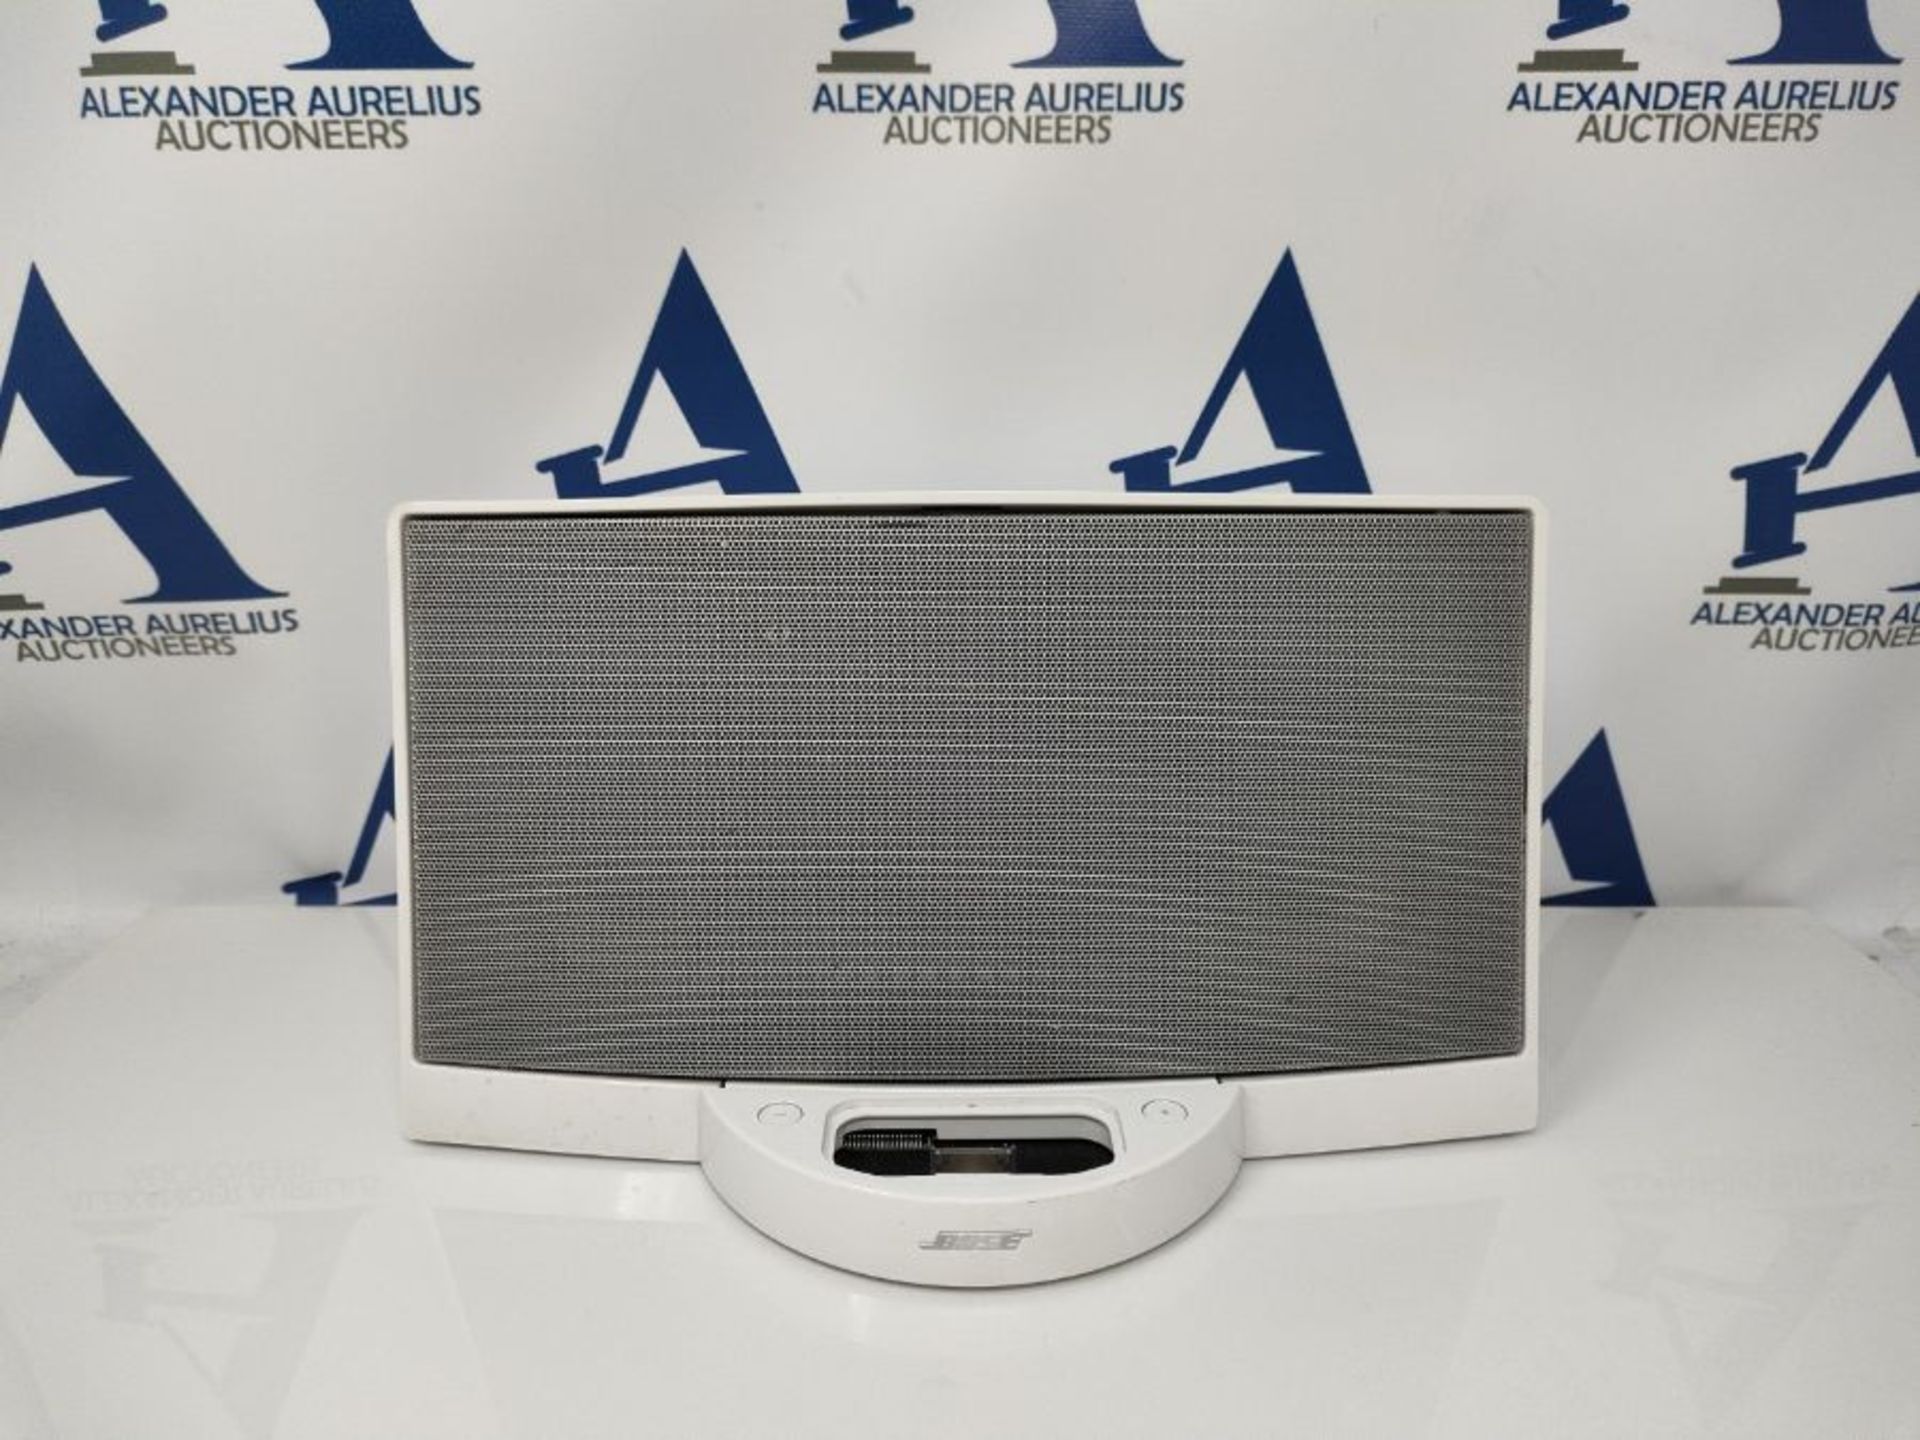 RRP £85.00 Bose SoundDock Digital Music System - Portable speakers with digital player dock for i - Image 2 of 4